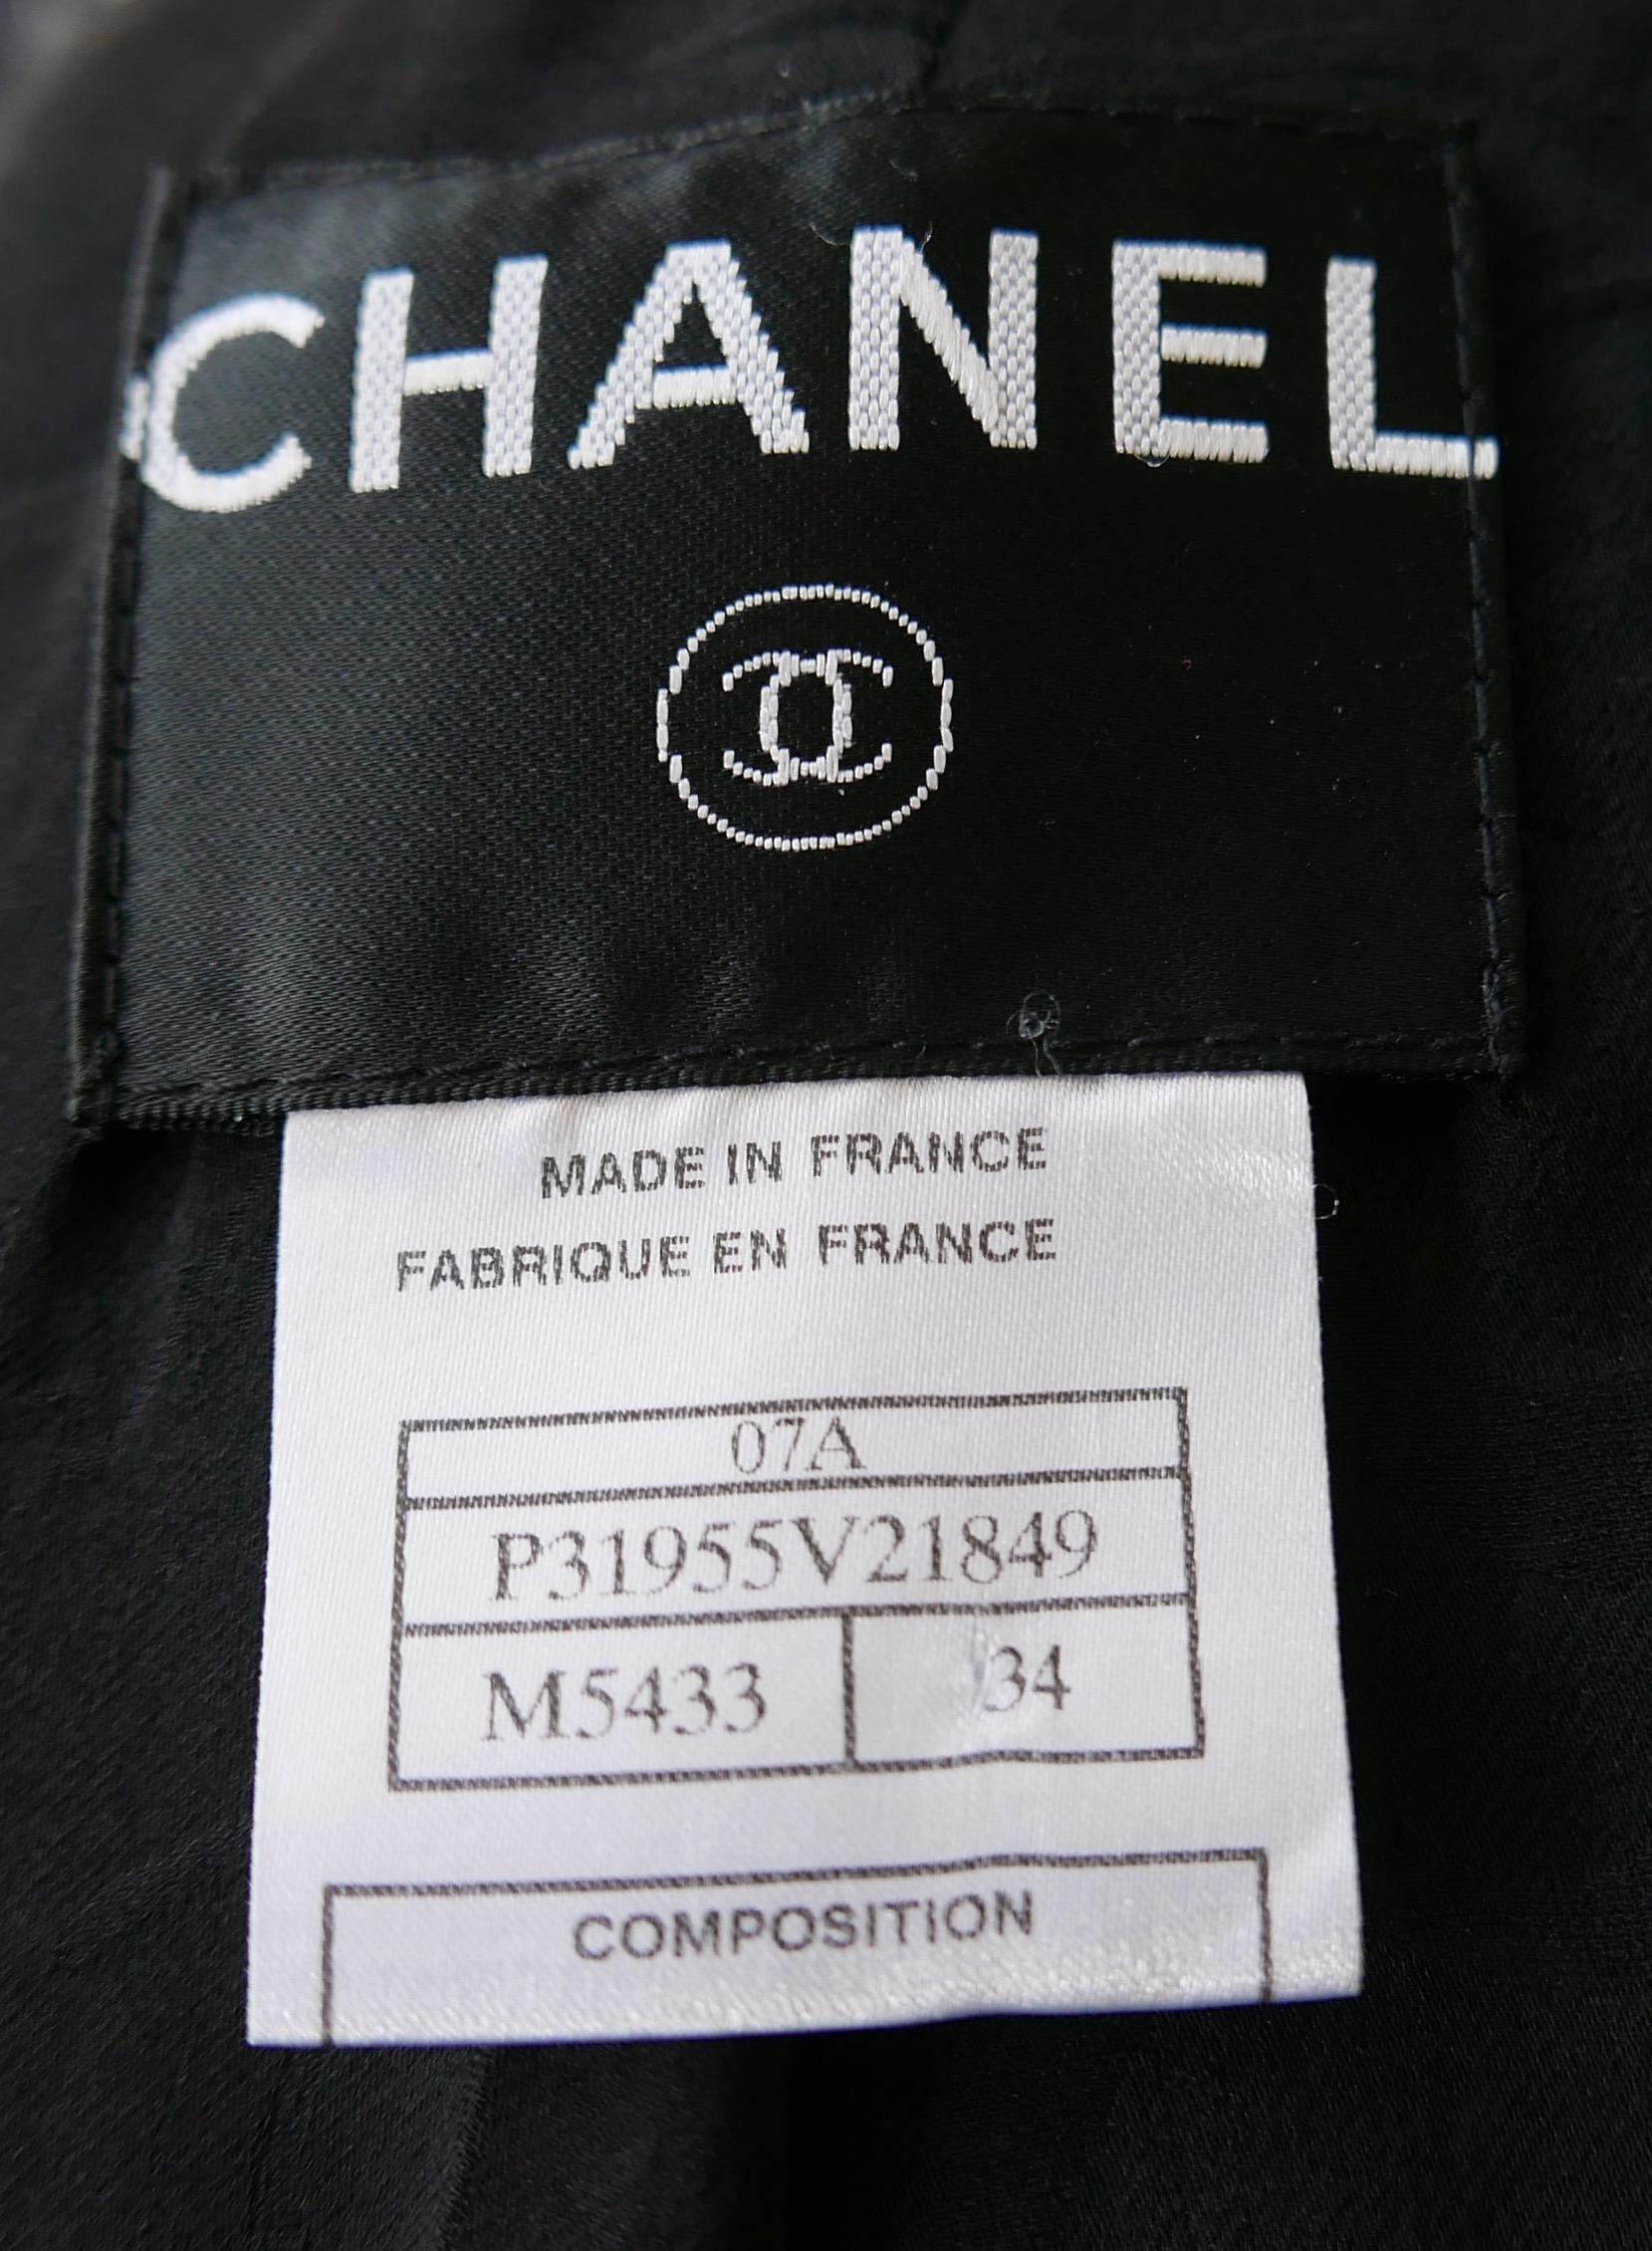 Chanel Fall 2007 07A Cashmere Houndstooth Tweed Jacket For Sale 3